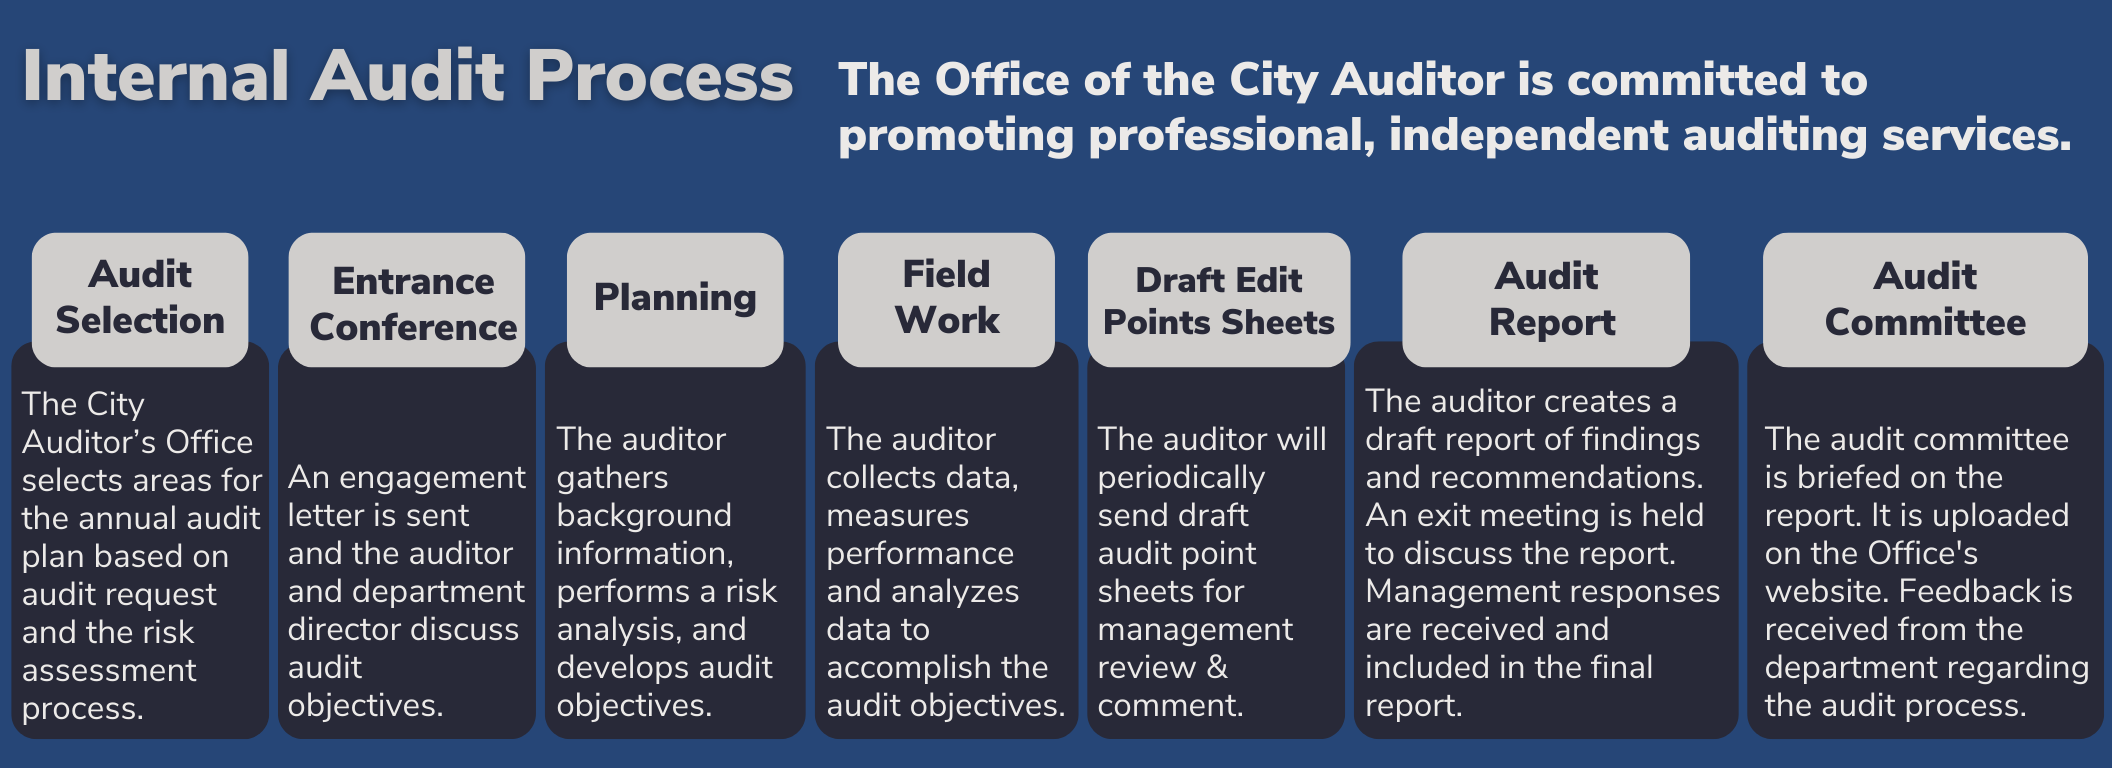 The Office of the City Auditor is committed to promoting professional, independent auditing services.